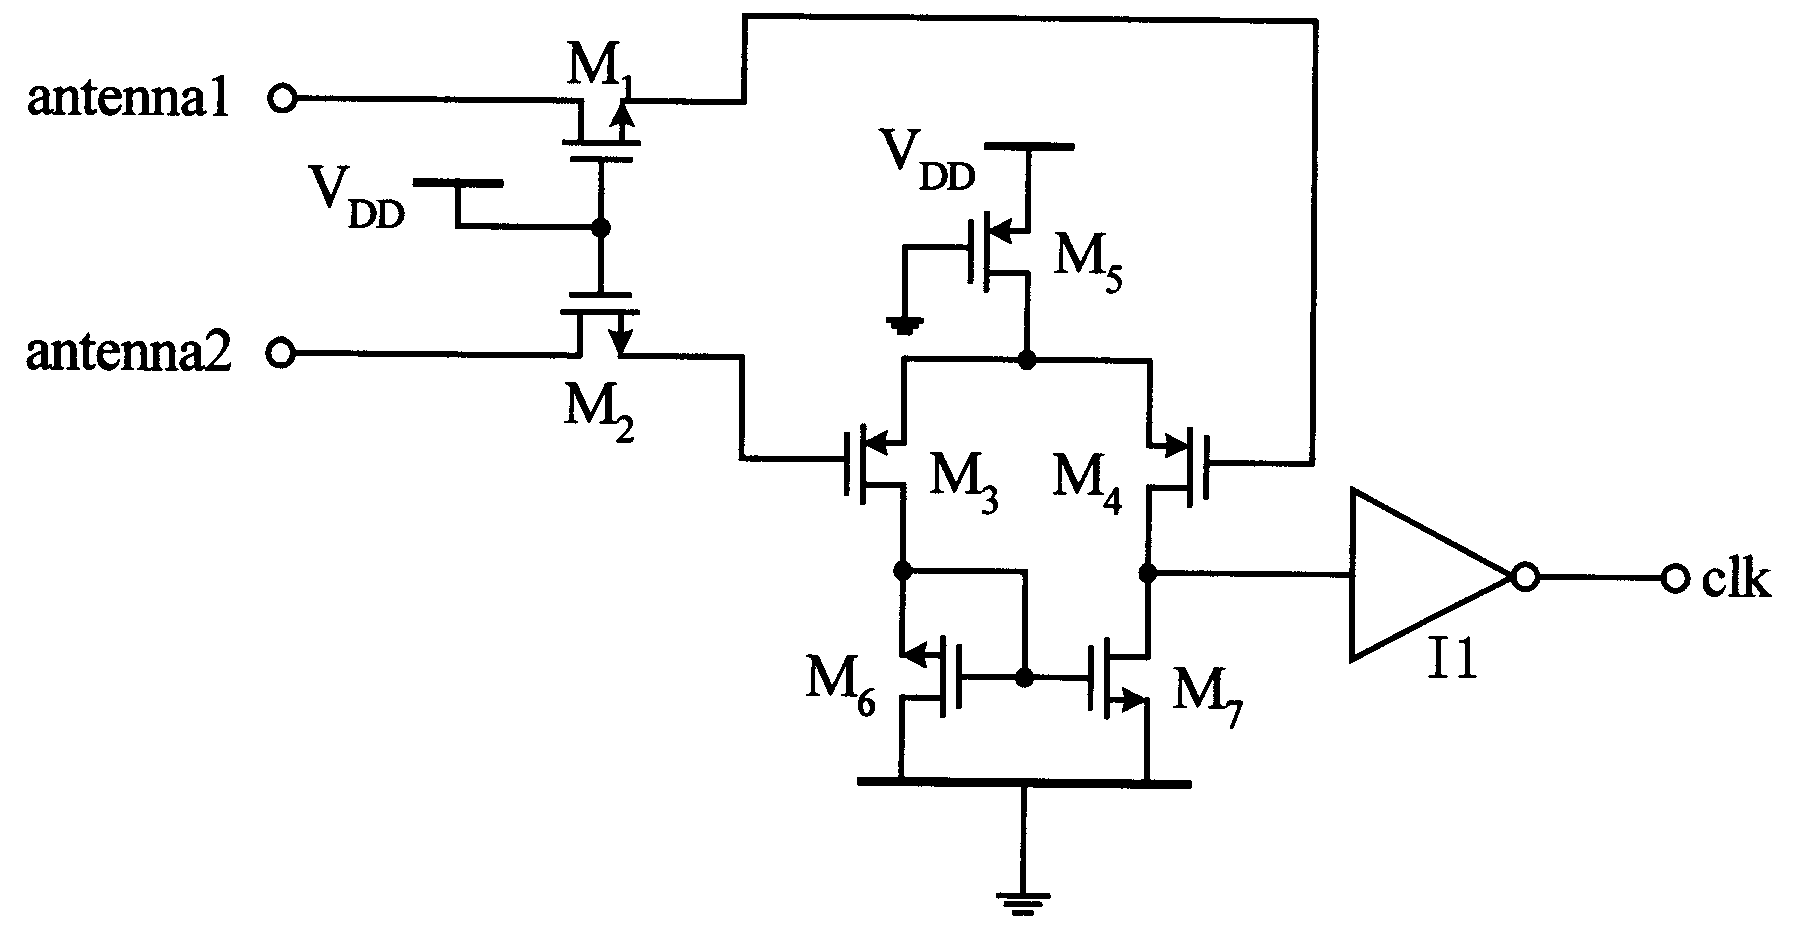 Clock recovery circuit used in non-contact IC card and radio frequency identification label